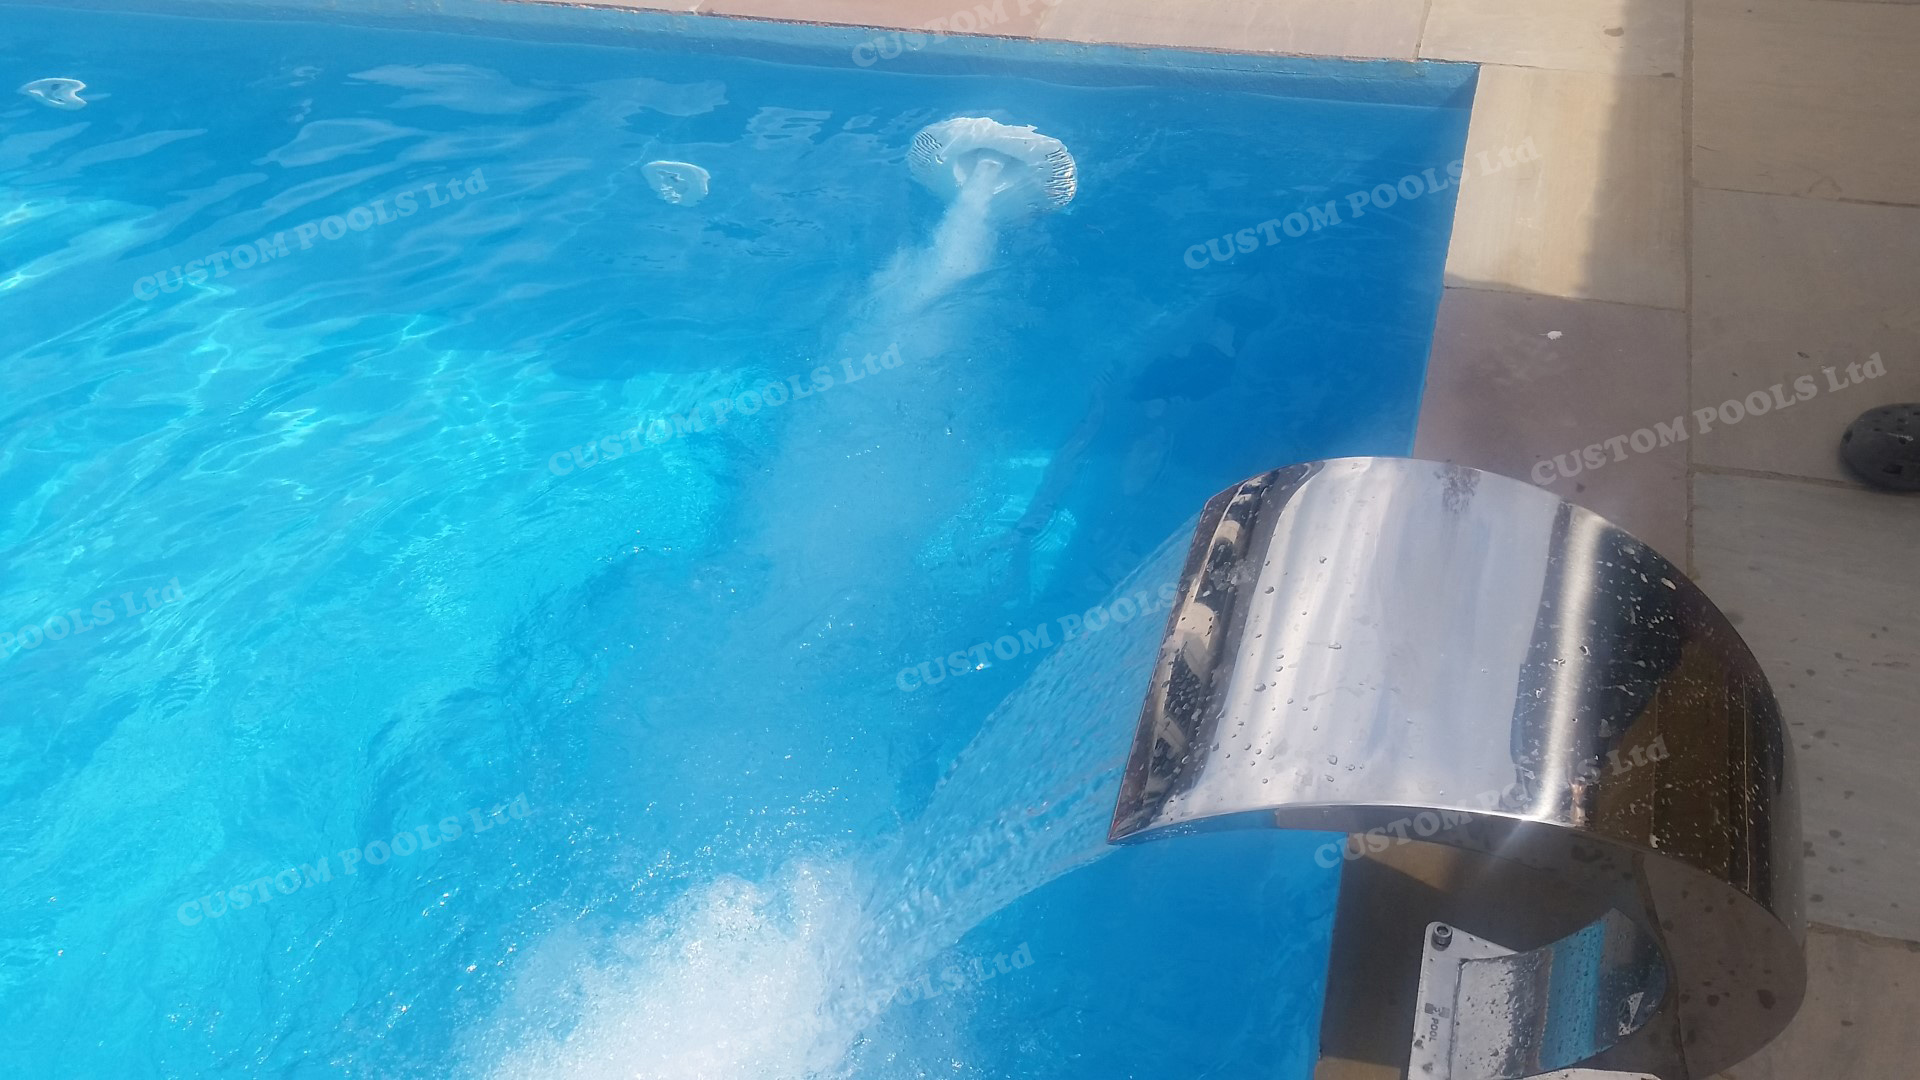 Made to order fibreglass pool with waterfall and swim jet